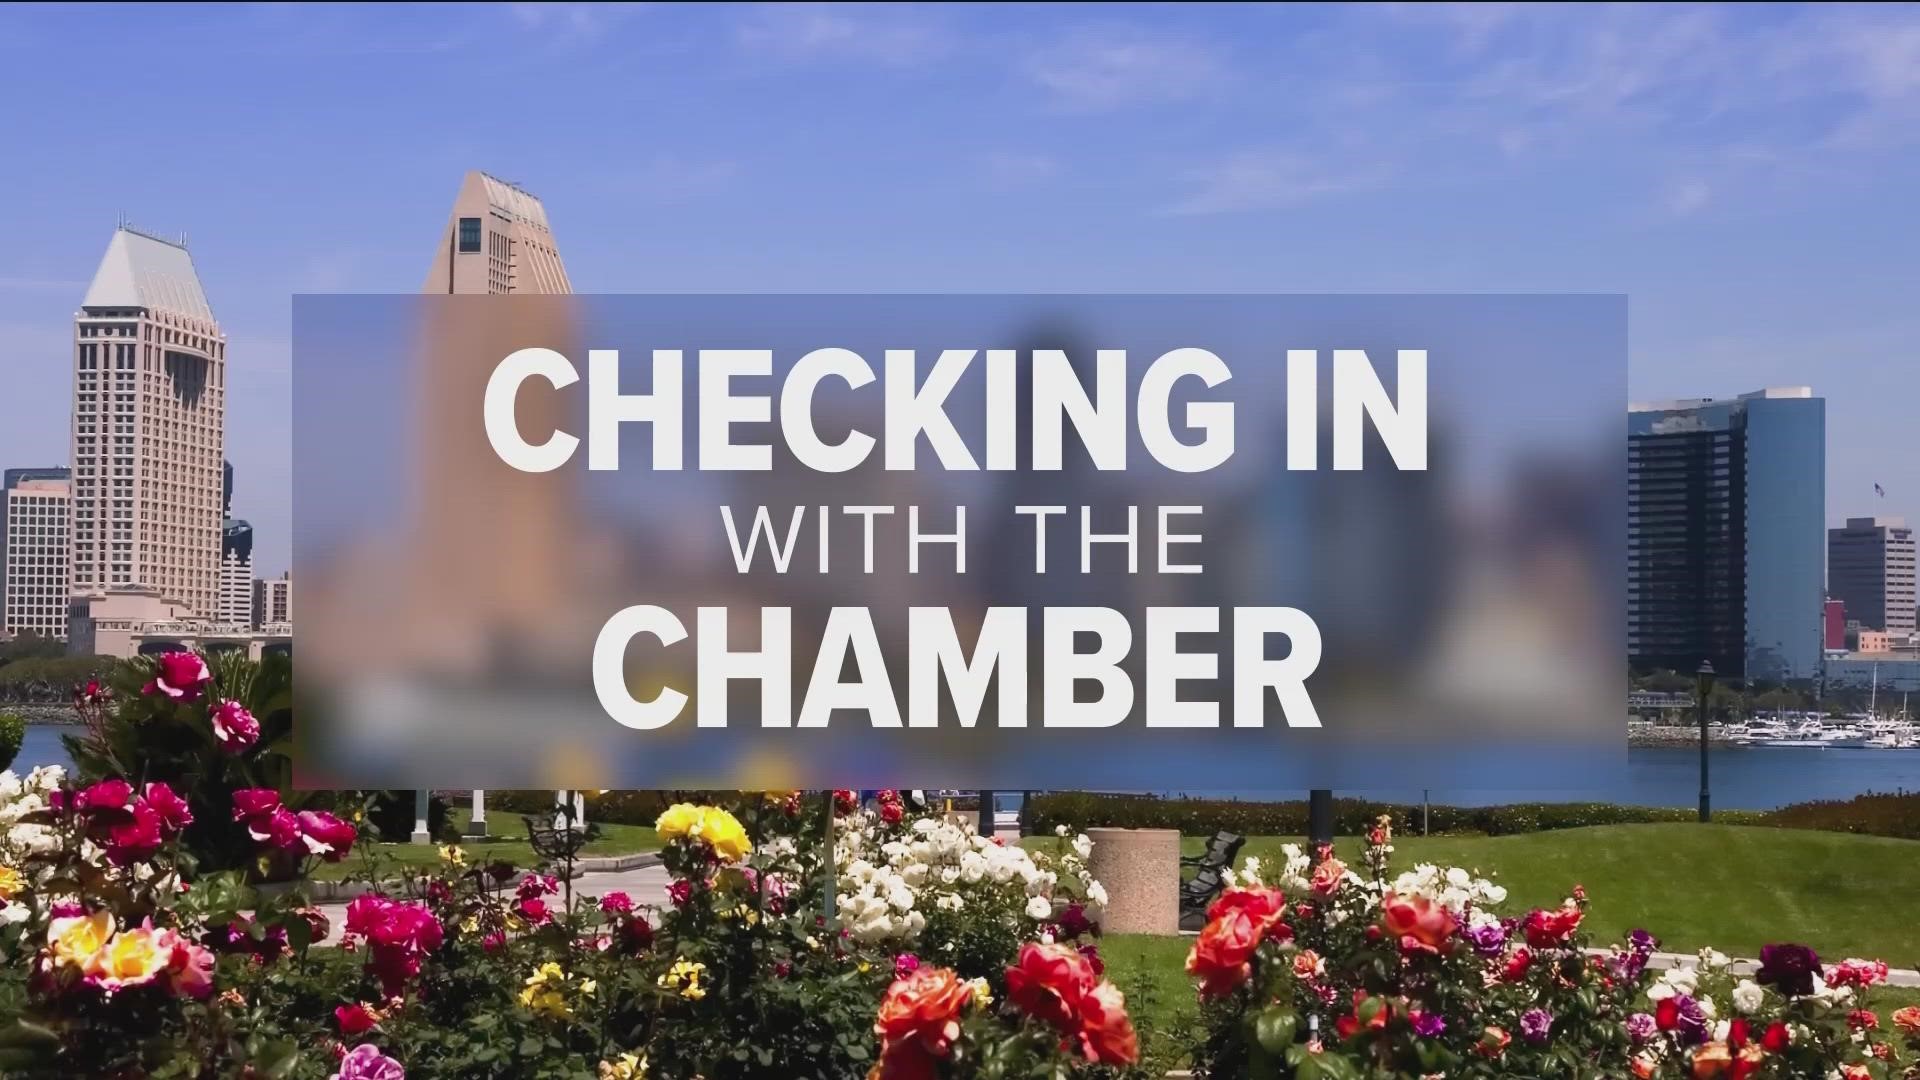 CBS 8 speaks to the Chamber of Commerce on new initiatives